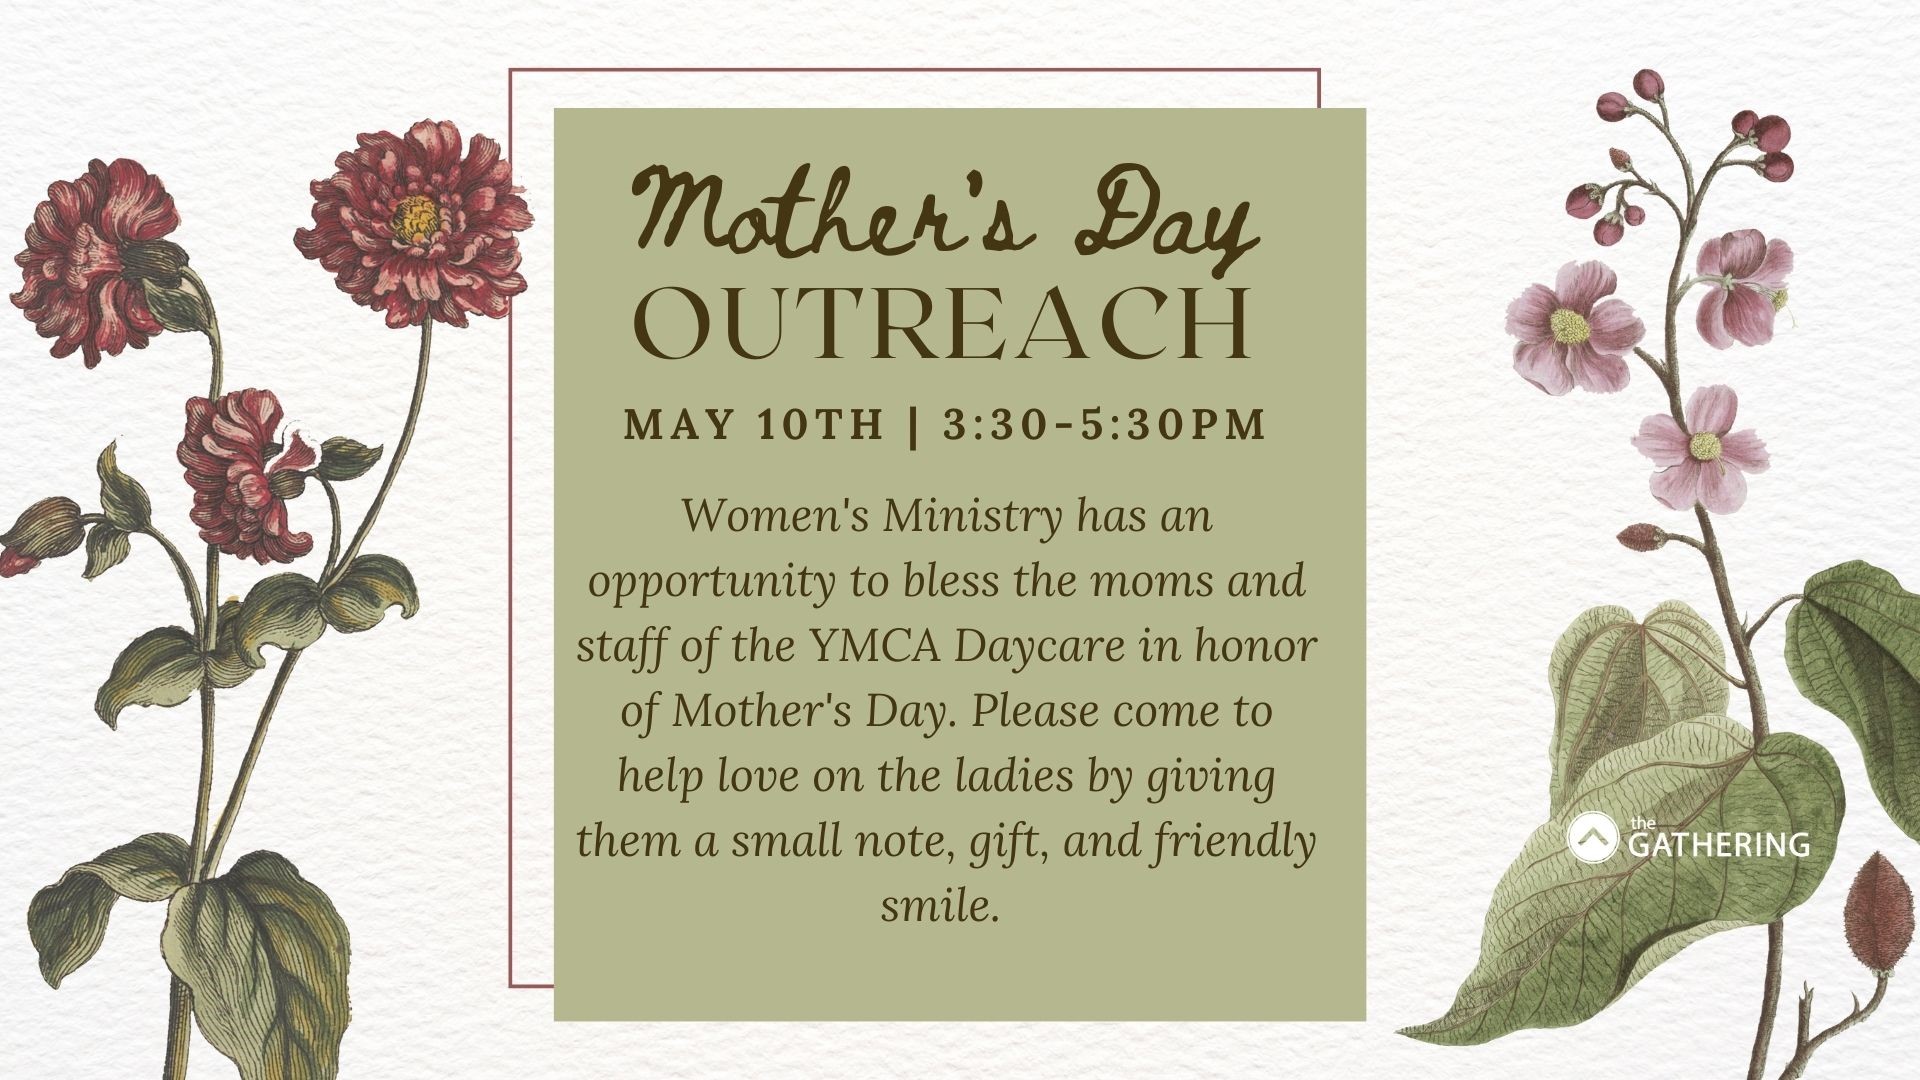 Mothers Day Outreach image